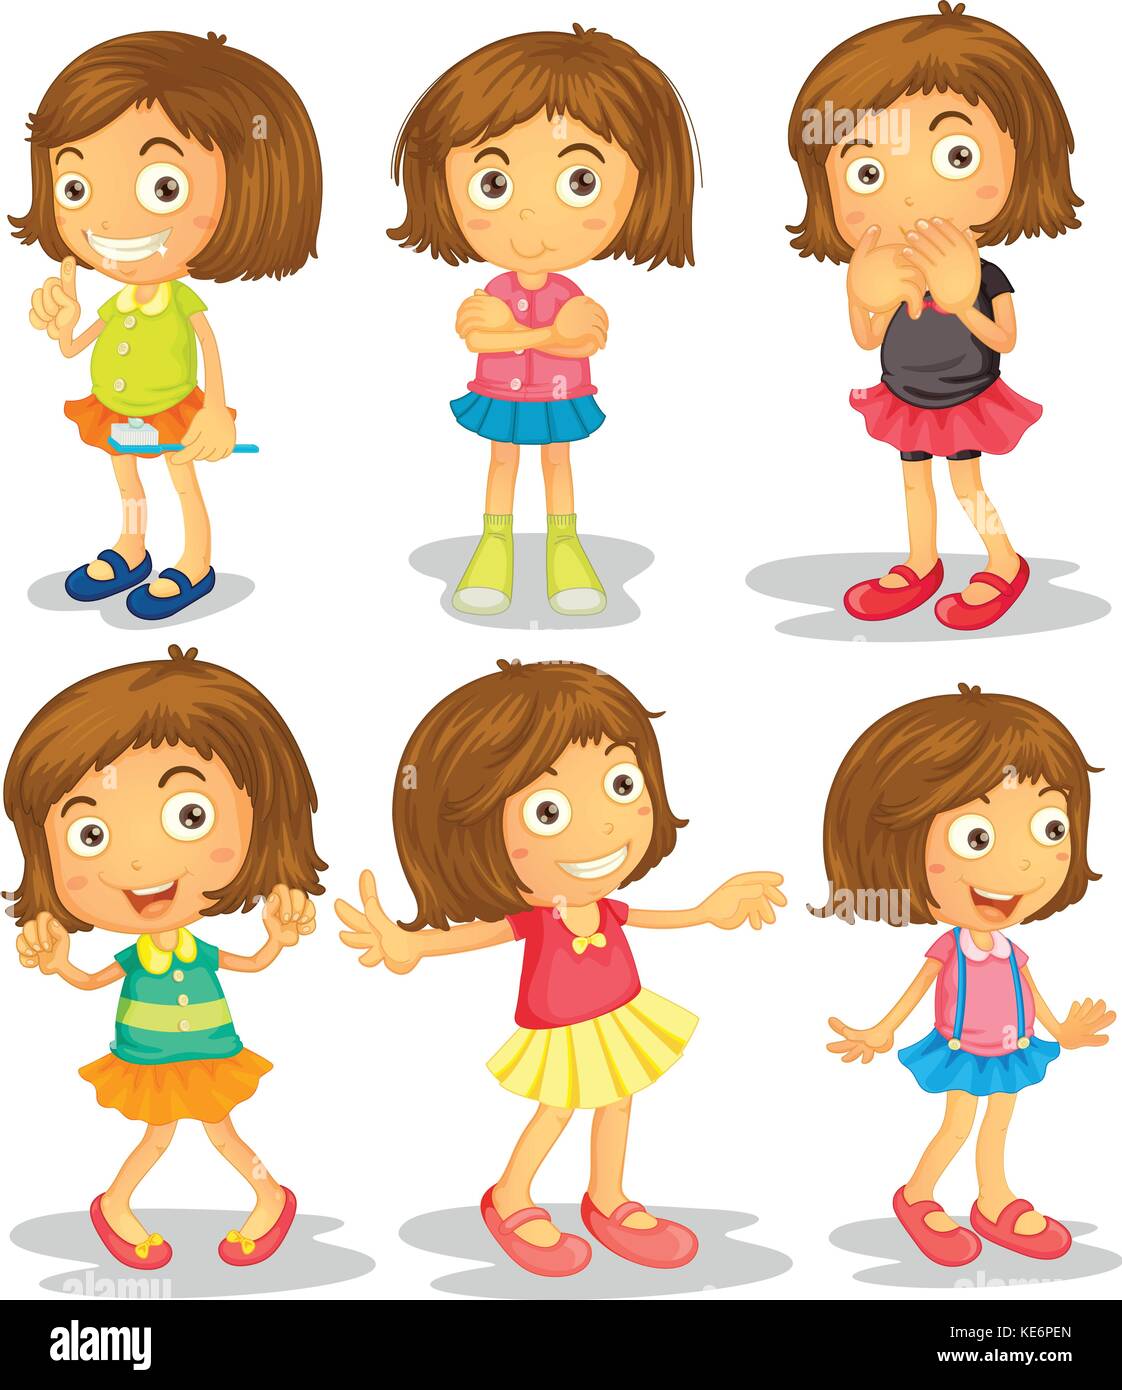 Cute Beautiful Girl In The Style Of Stickers In Different Poses Third Pack  Stock Illustration - Download Image Now - iStock